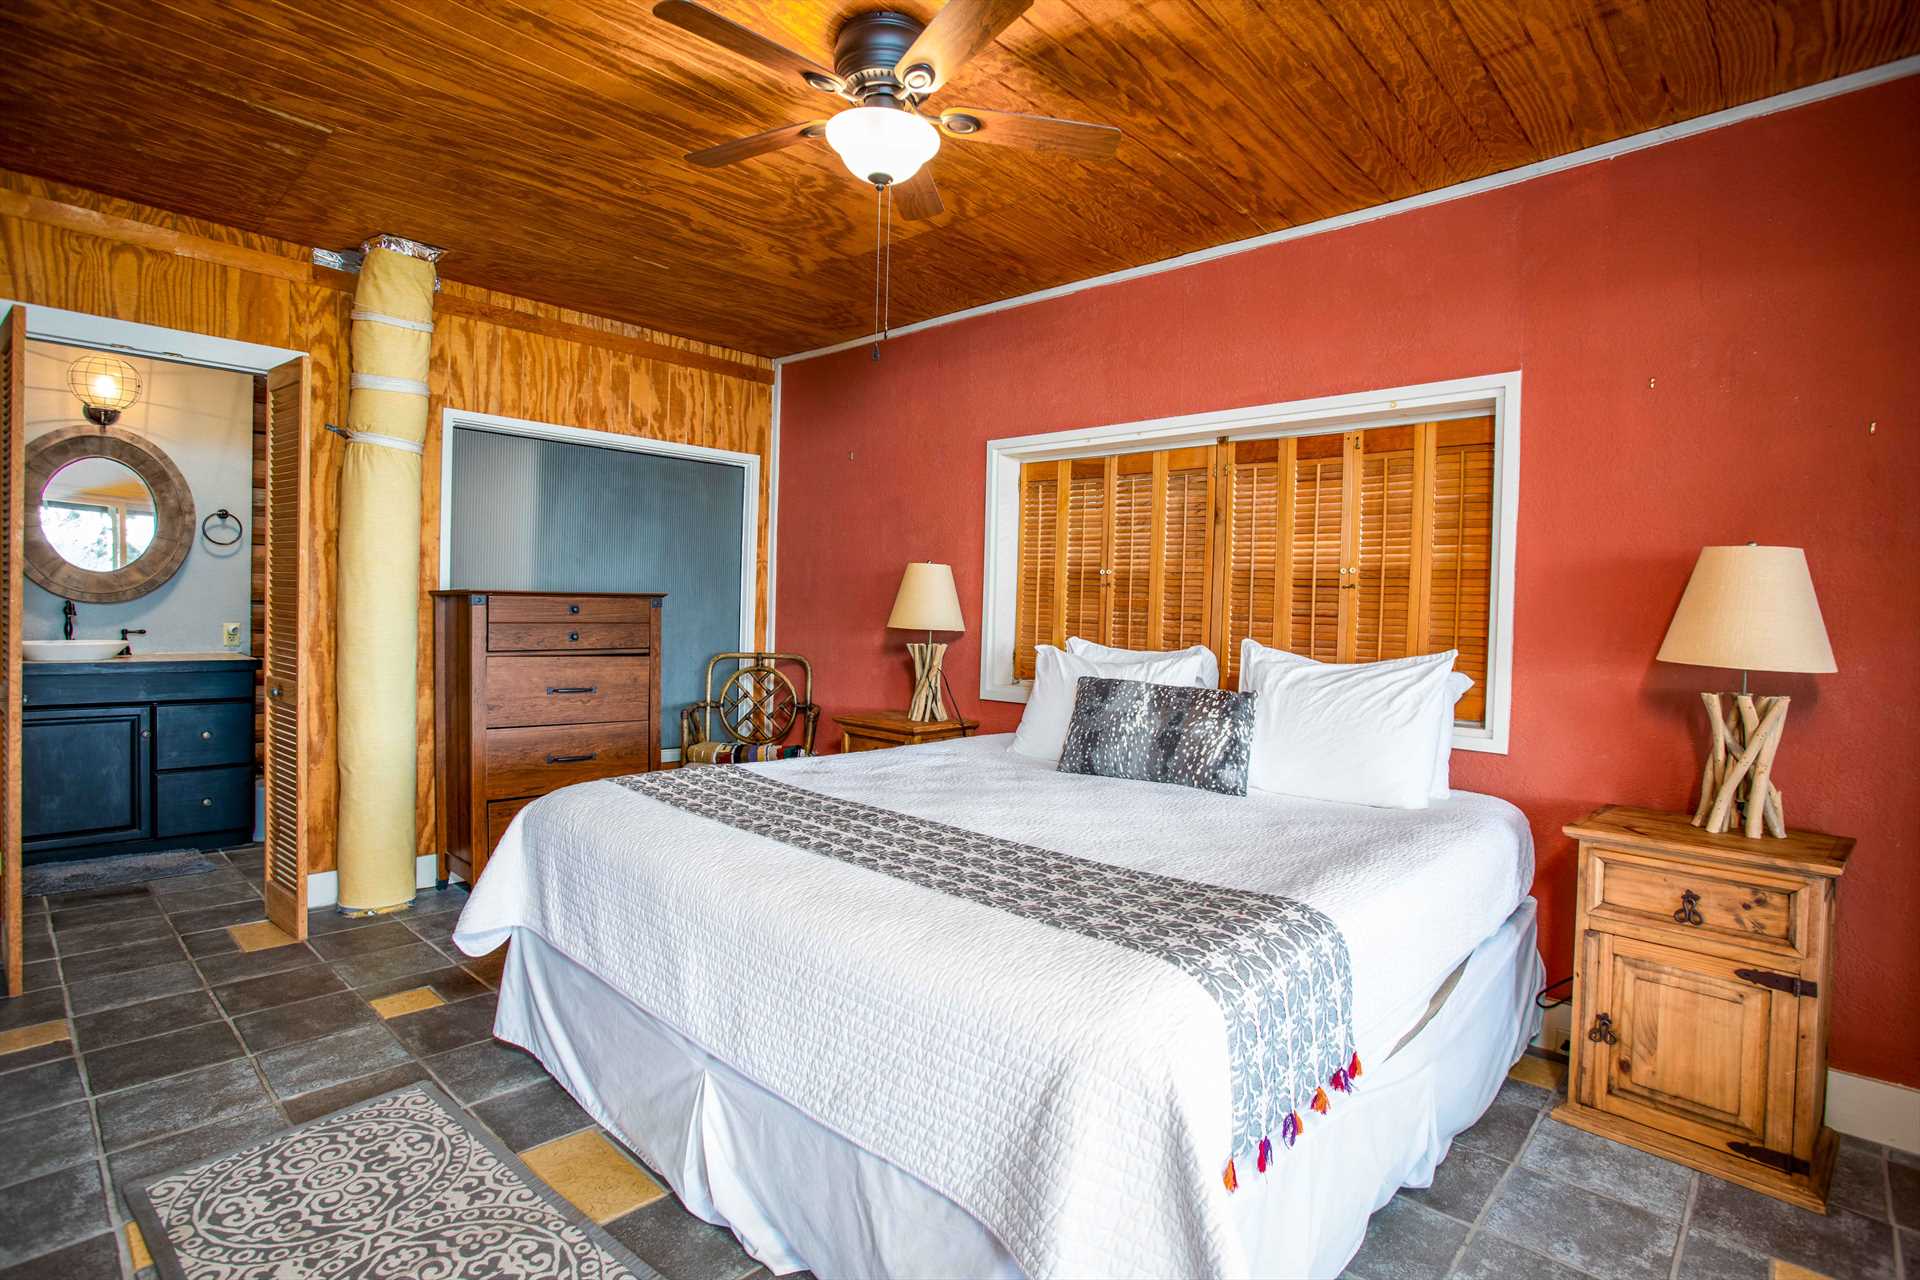                                                 The spacious and stylish master suite features a roomy and comfortable king-sized bed. All bed and bath linens are provided, as well.